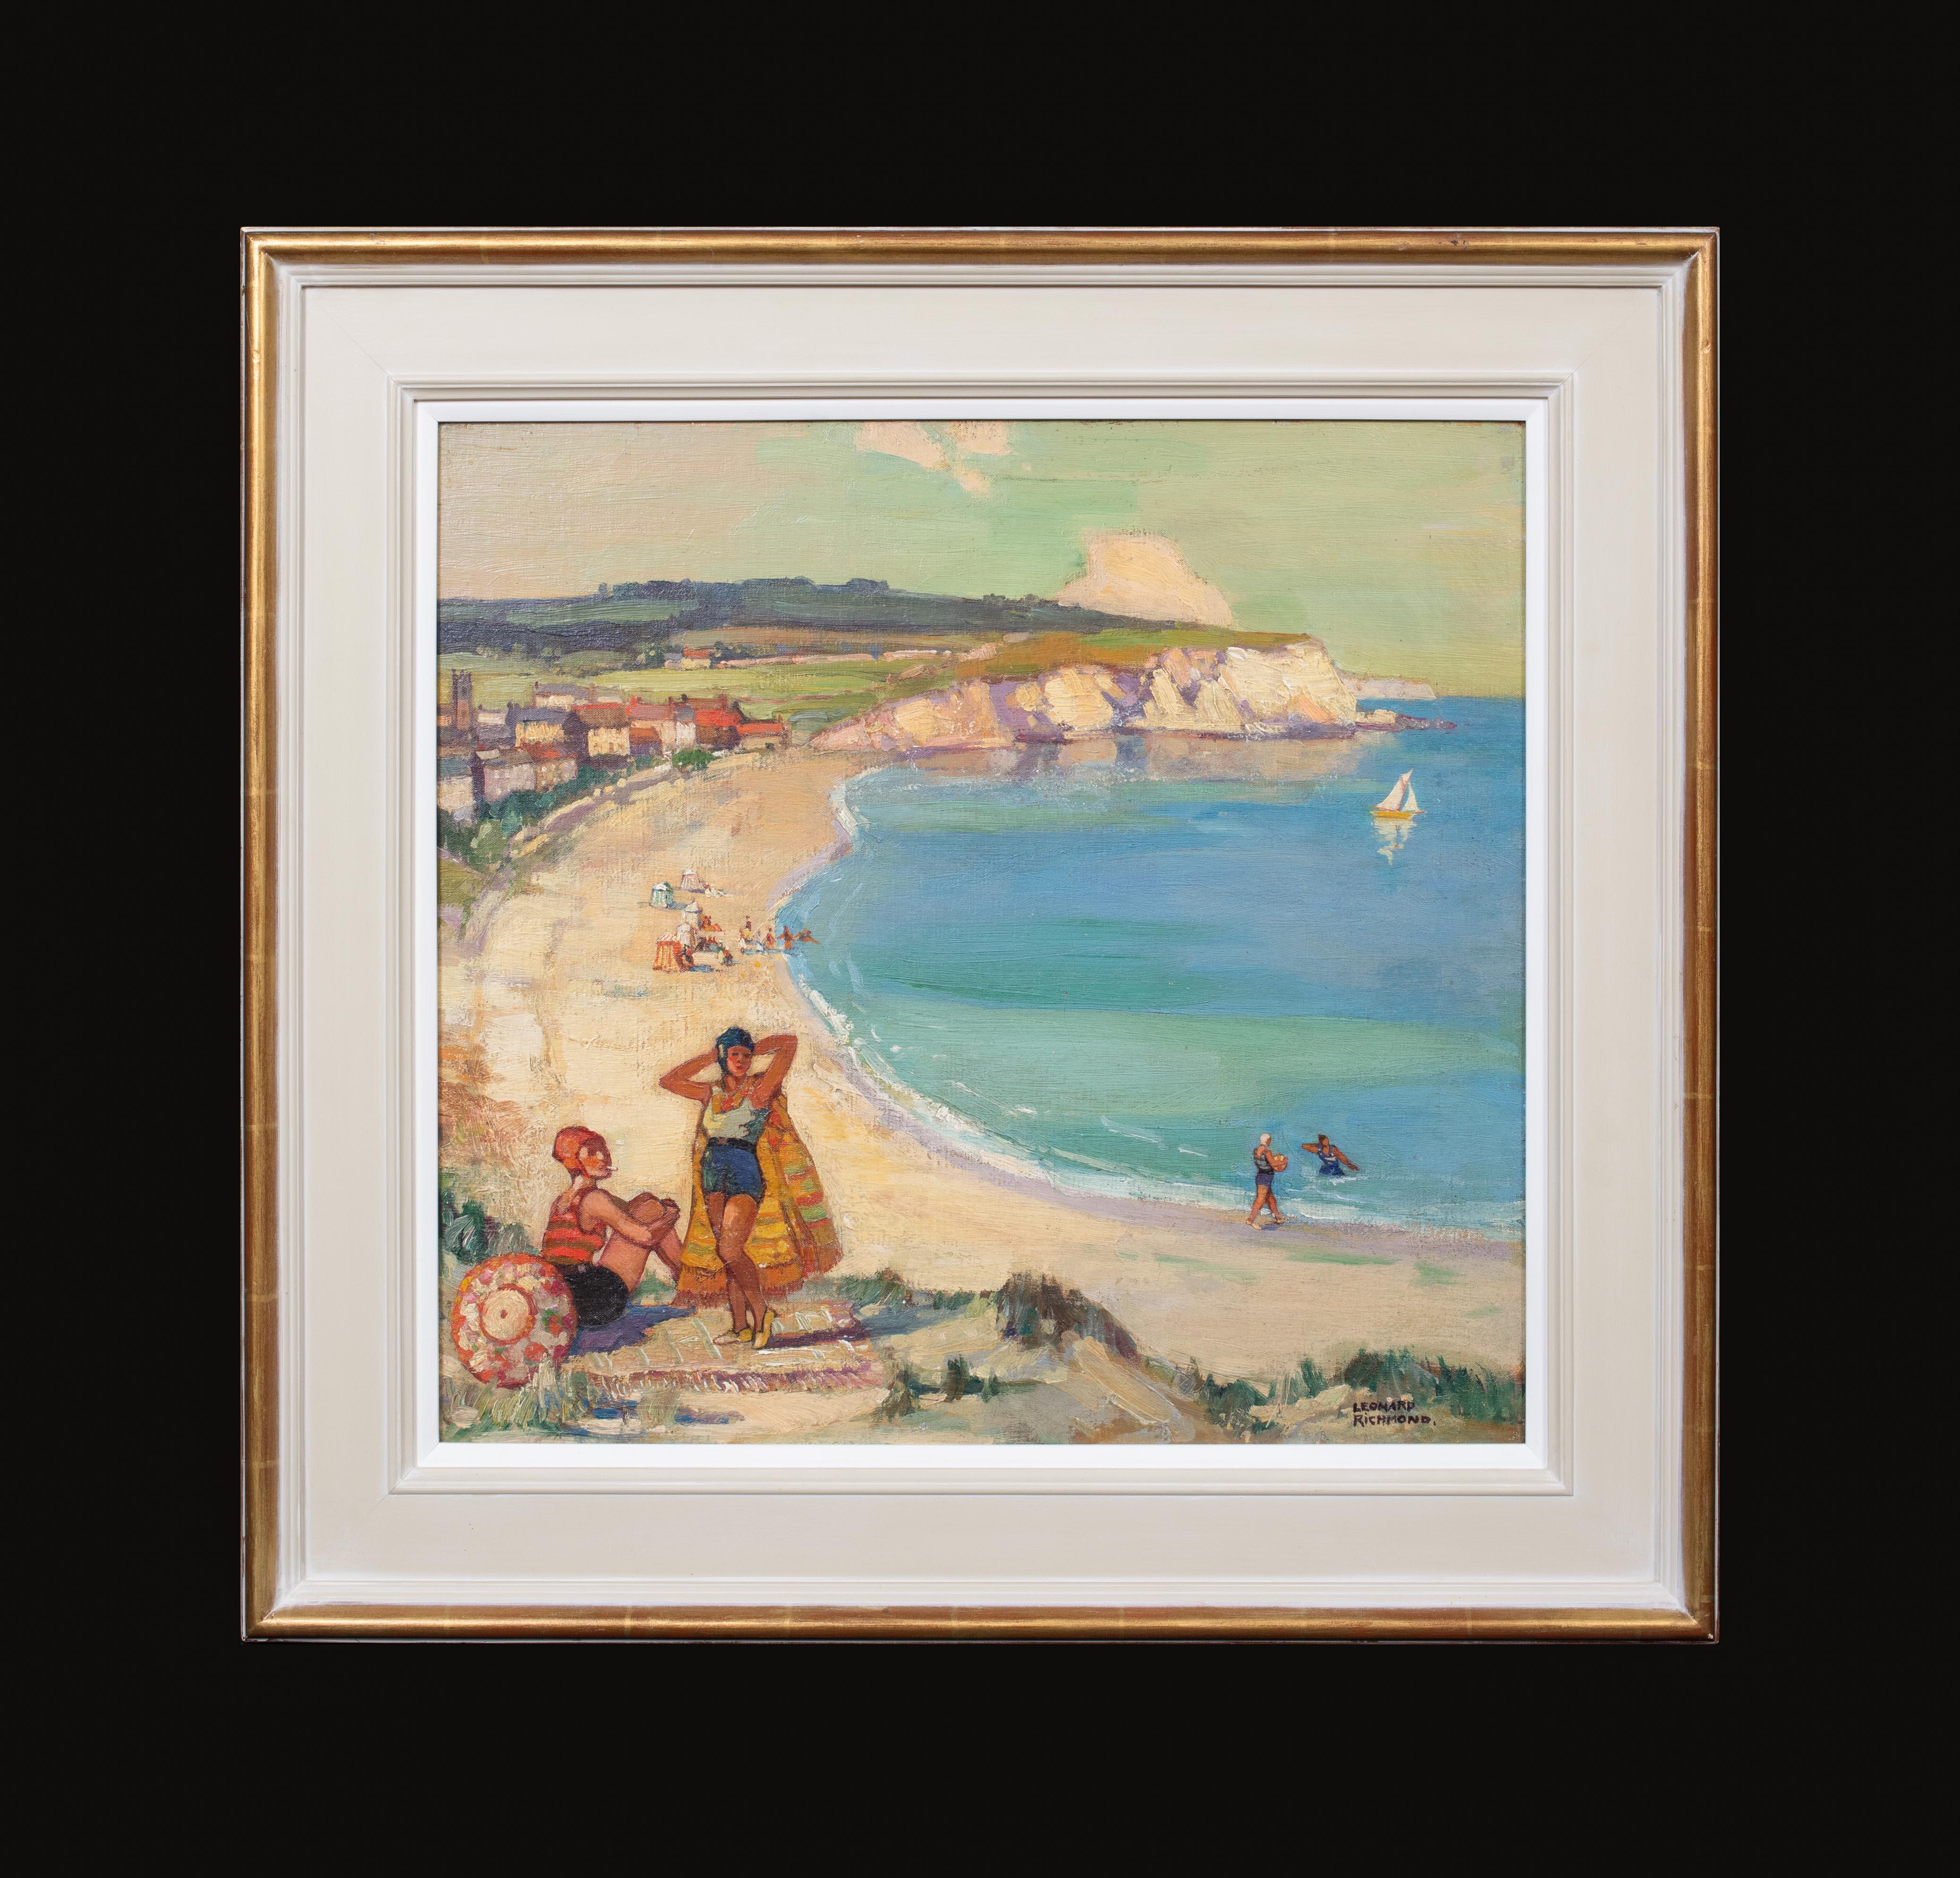 Bathers At The Beach, Near St Ives, circa 1930 - Brown Landscape Painting by Leonard Richmond